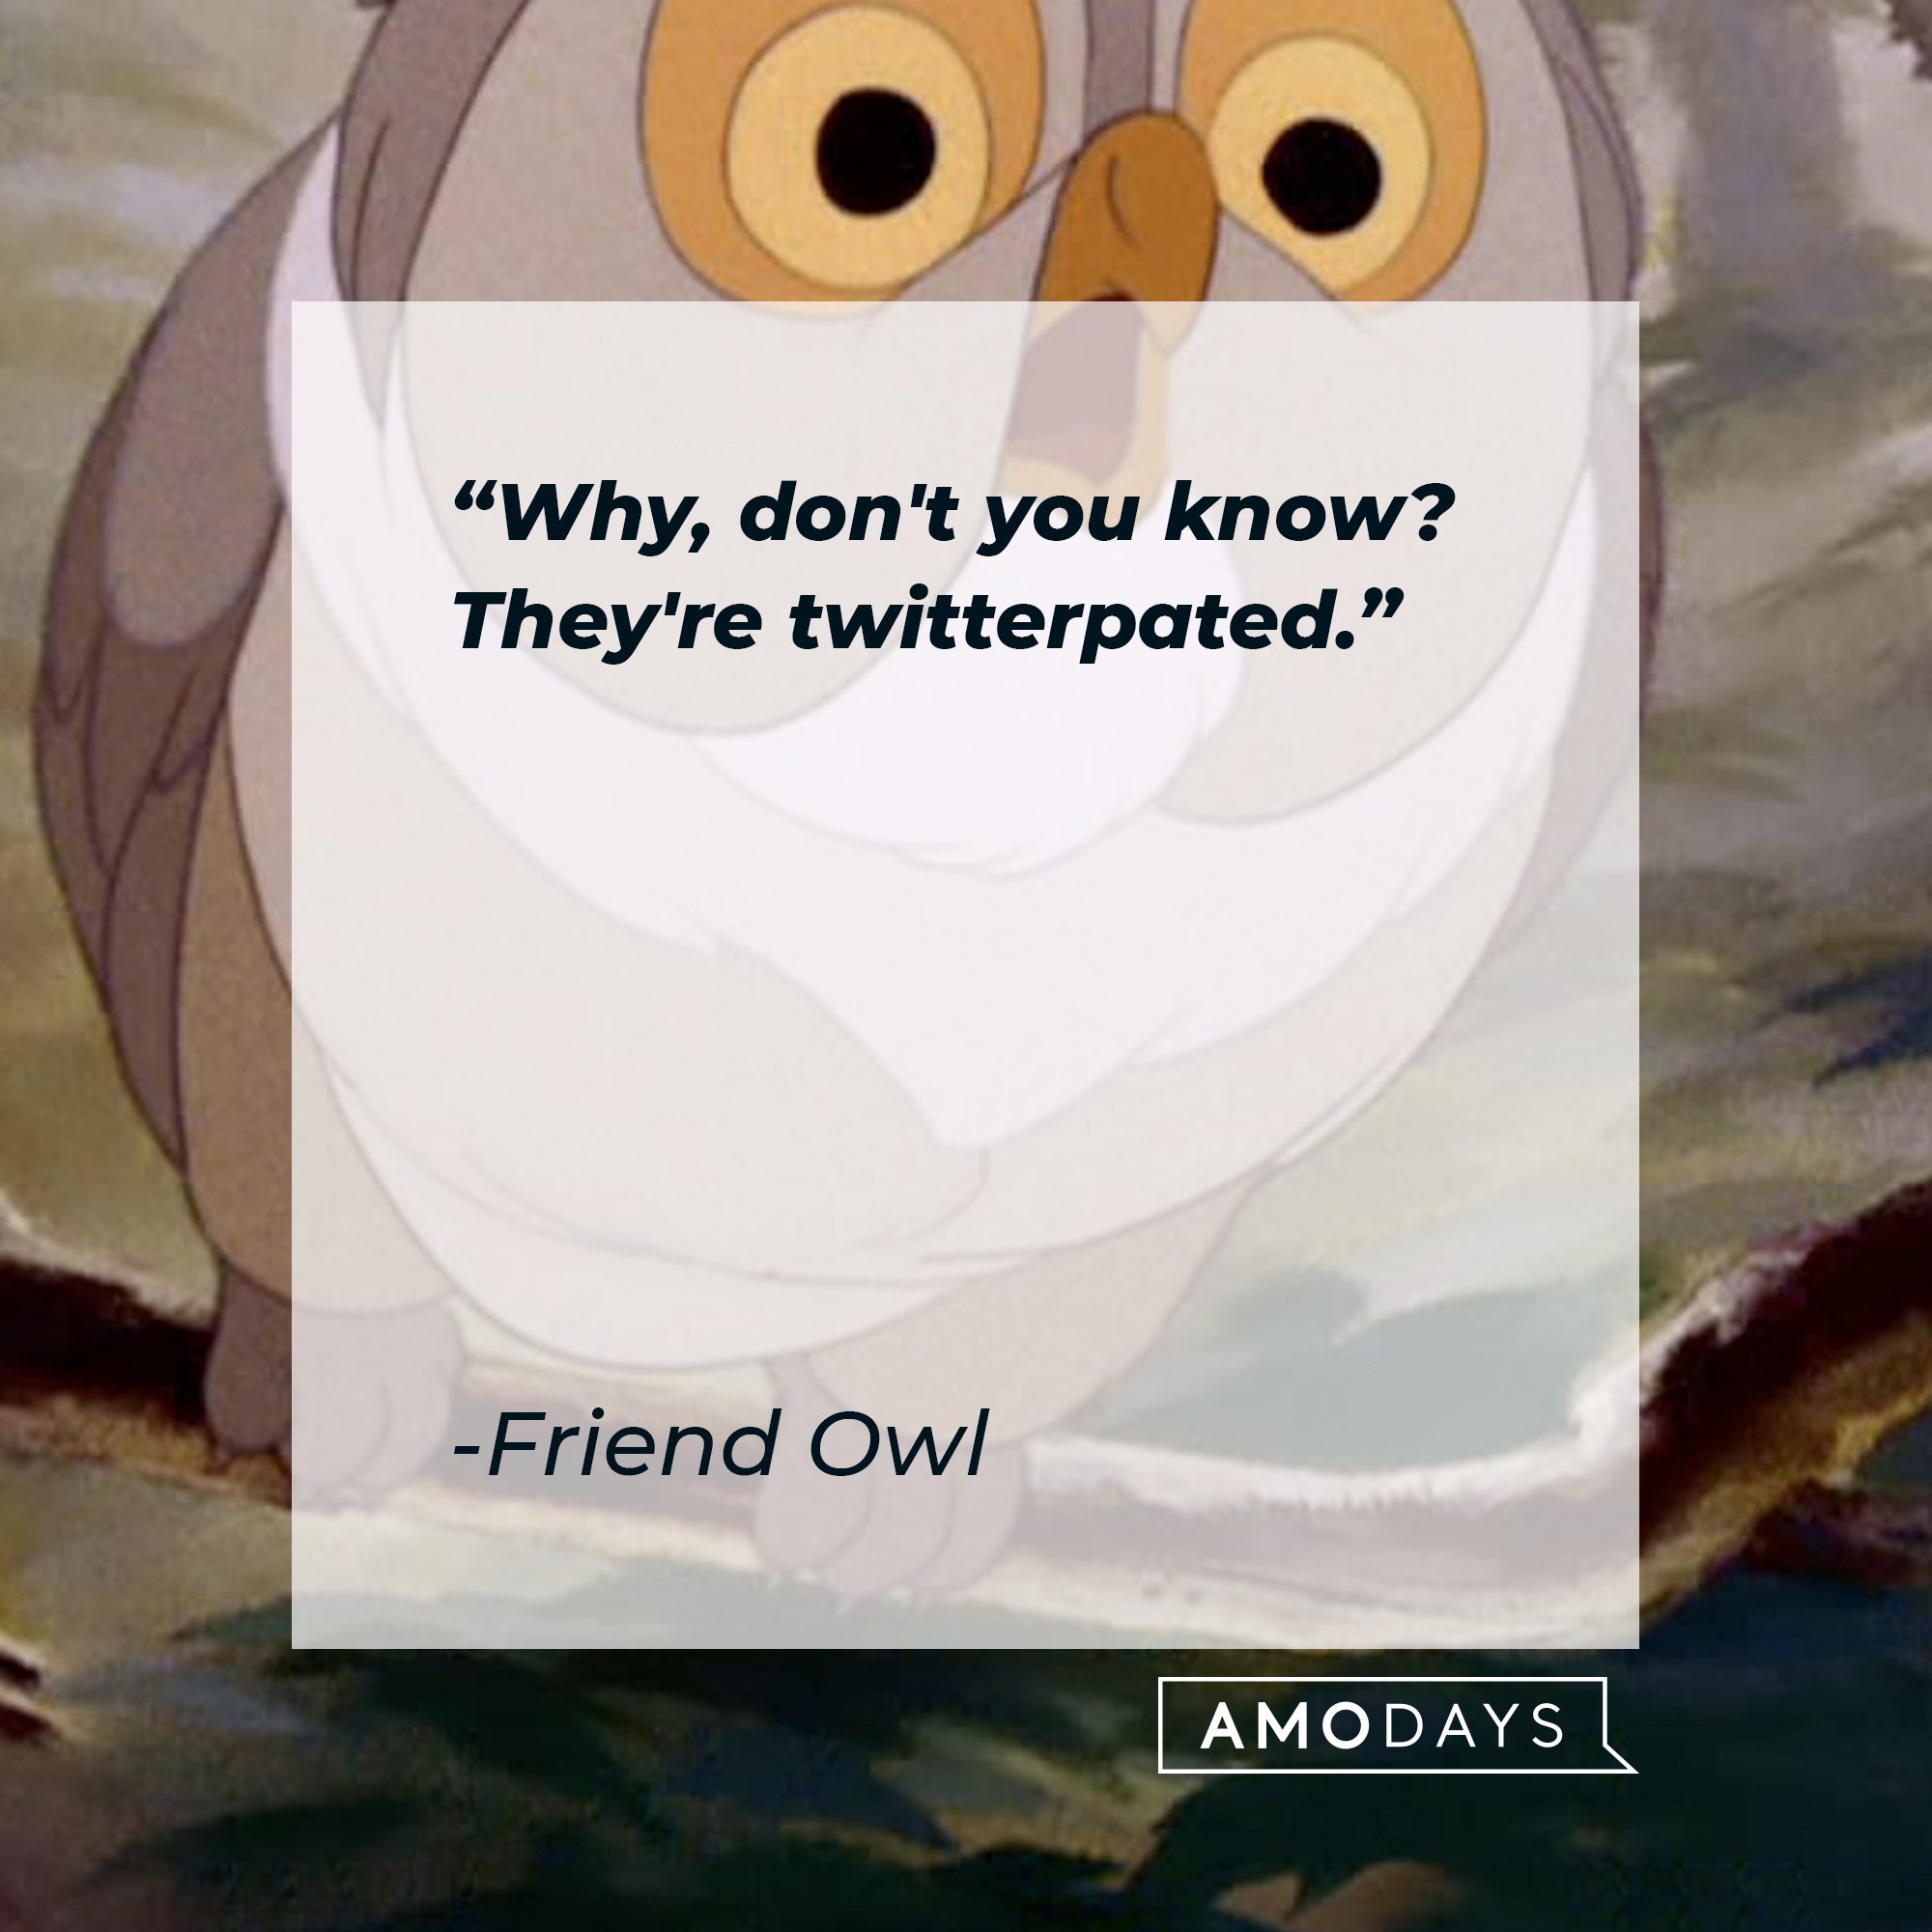 Friend Owl 's quote "Why, don't you know? They're twitterpated." | Source: facebook.com/DisneyBambi